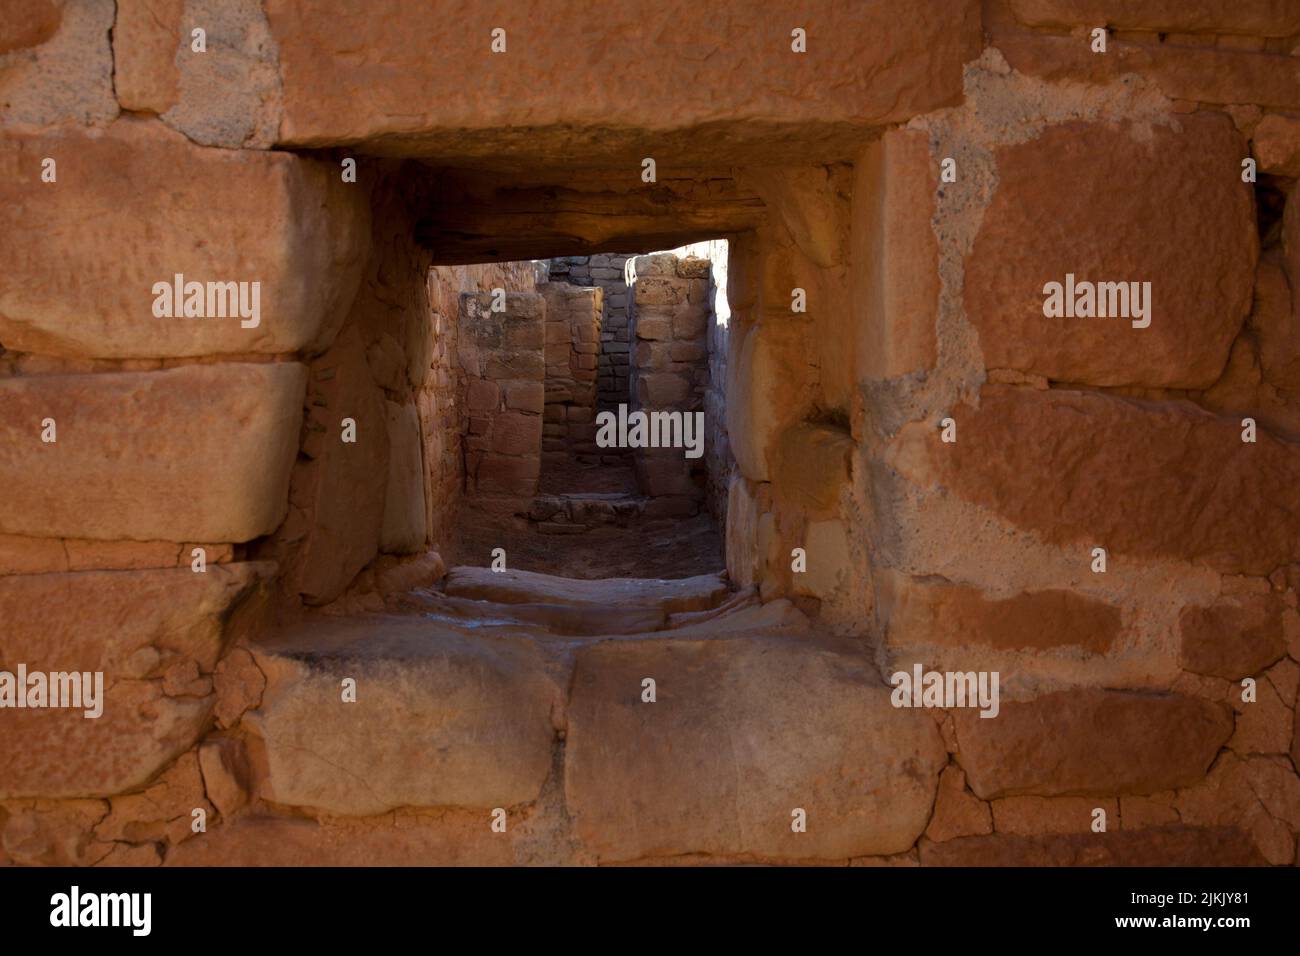 Anasazi adobe brick windows and doorways at Sun Temple ruins located inside Mesa Verde National Park in Colorado, A.D. 1250 Stock Photo